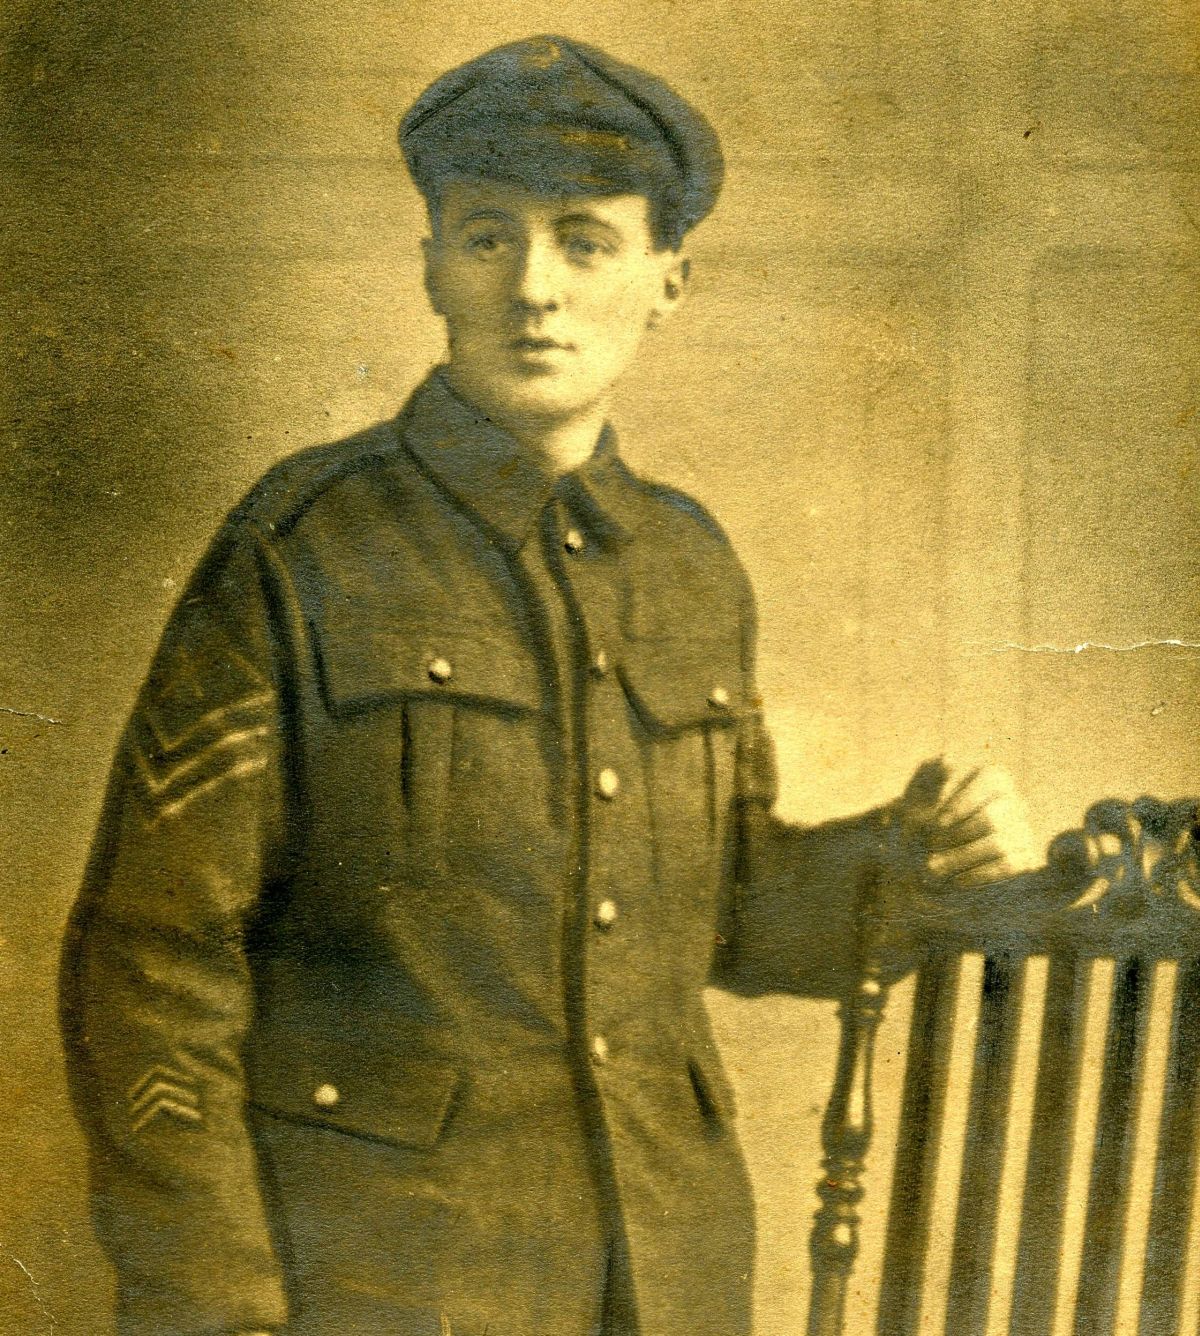 This is my paternal grandfather, William Kearton, taken about 1917 when he was in the Royal Flying Corps. I don't know a lot about him, but I'm told that his main job in the RFC was to recover aircraft that had crashed in no-man's land, between the trenches. View full size.